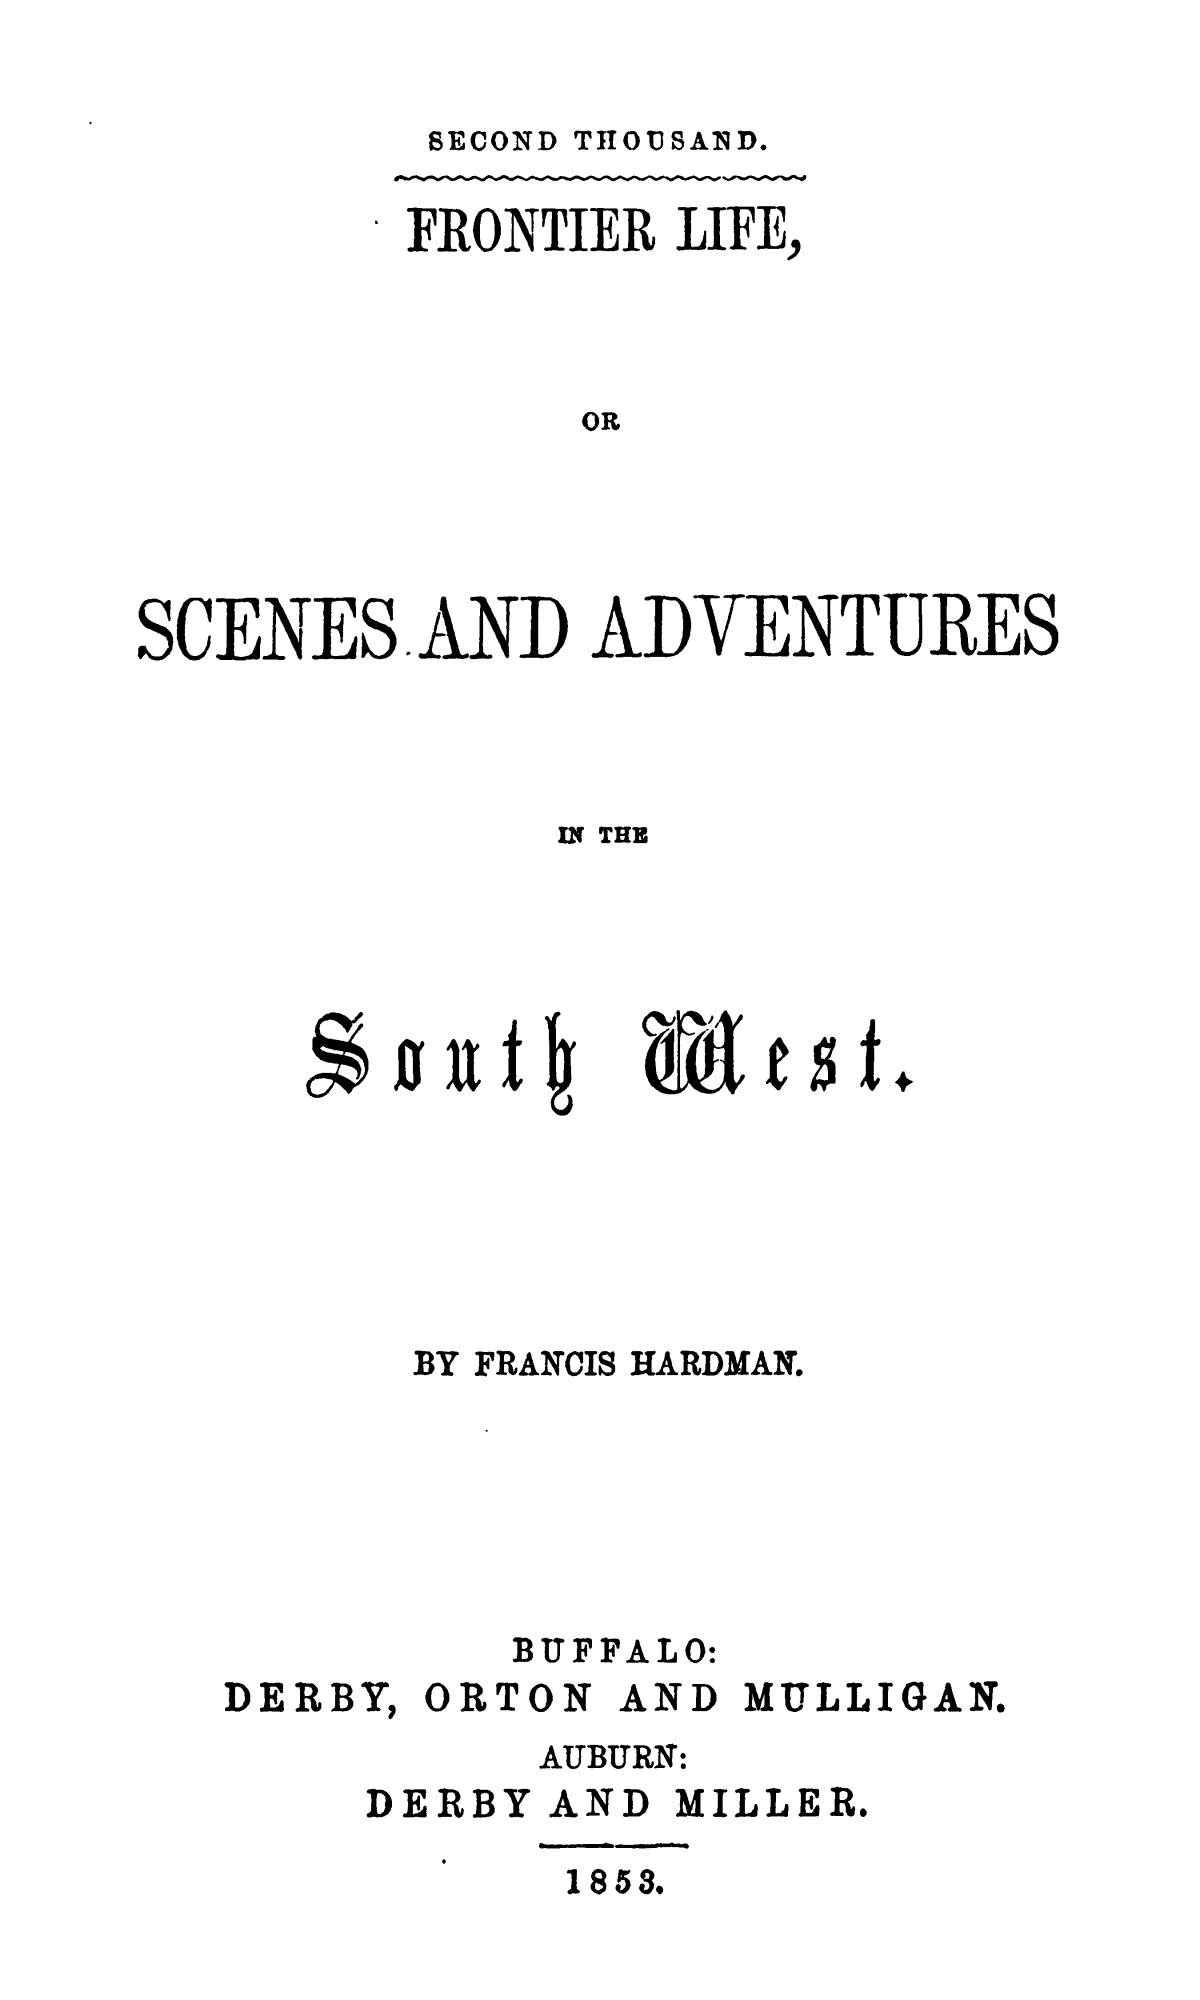 Frontier life; or, Scenes and adventures in the South West,
                                                
                                                    TC
                                                